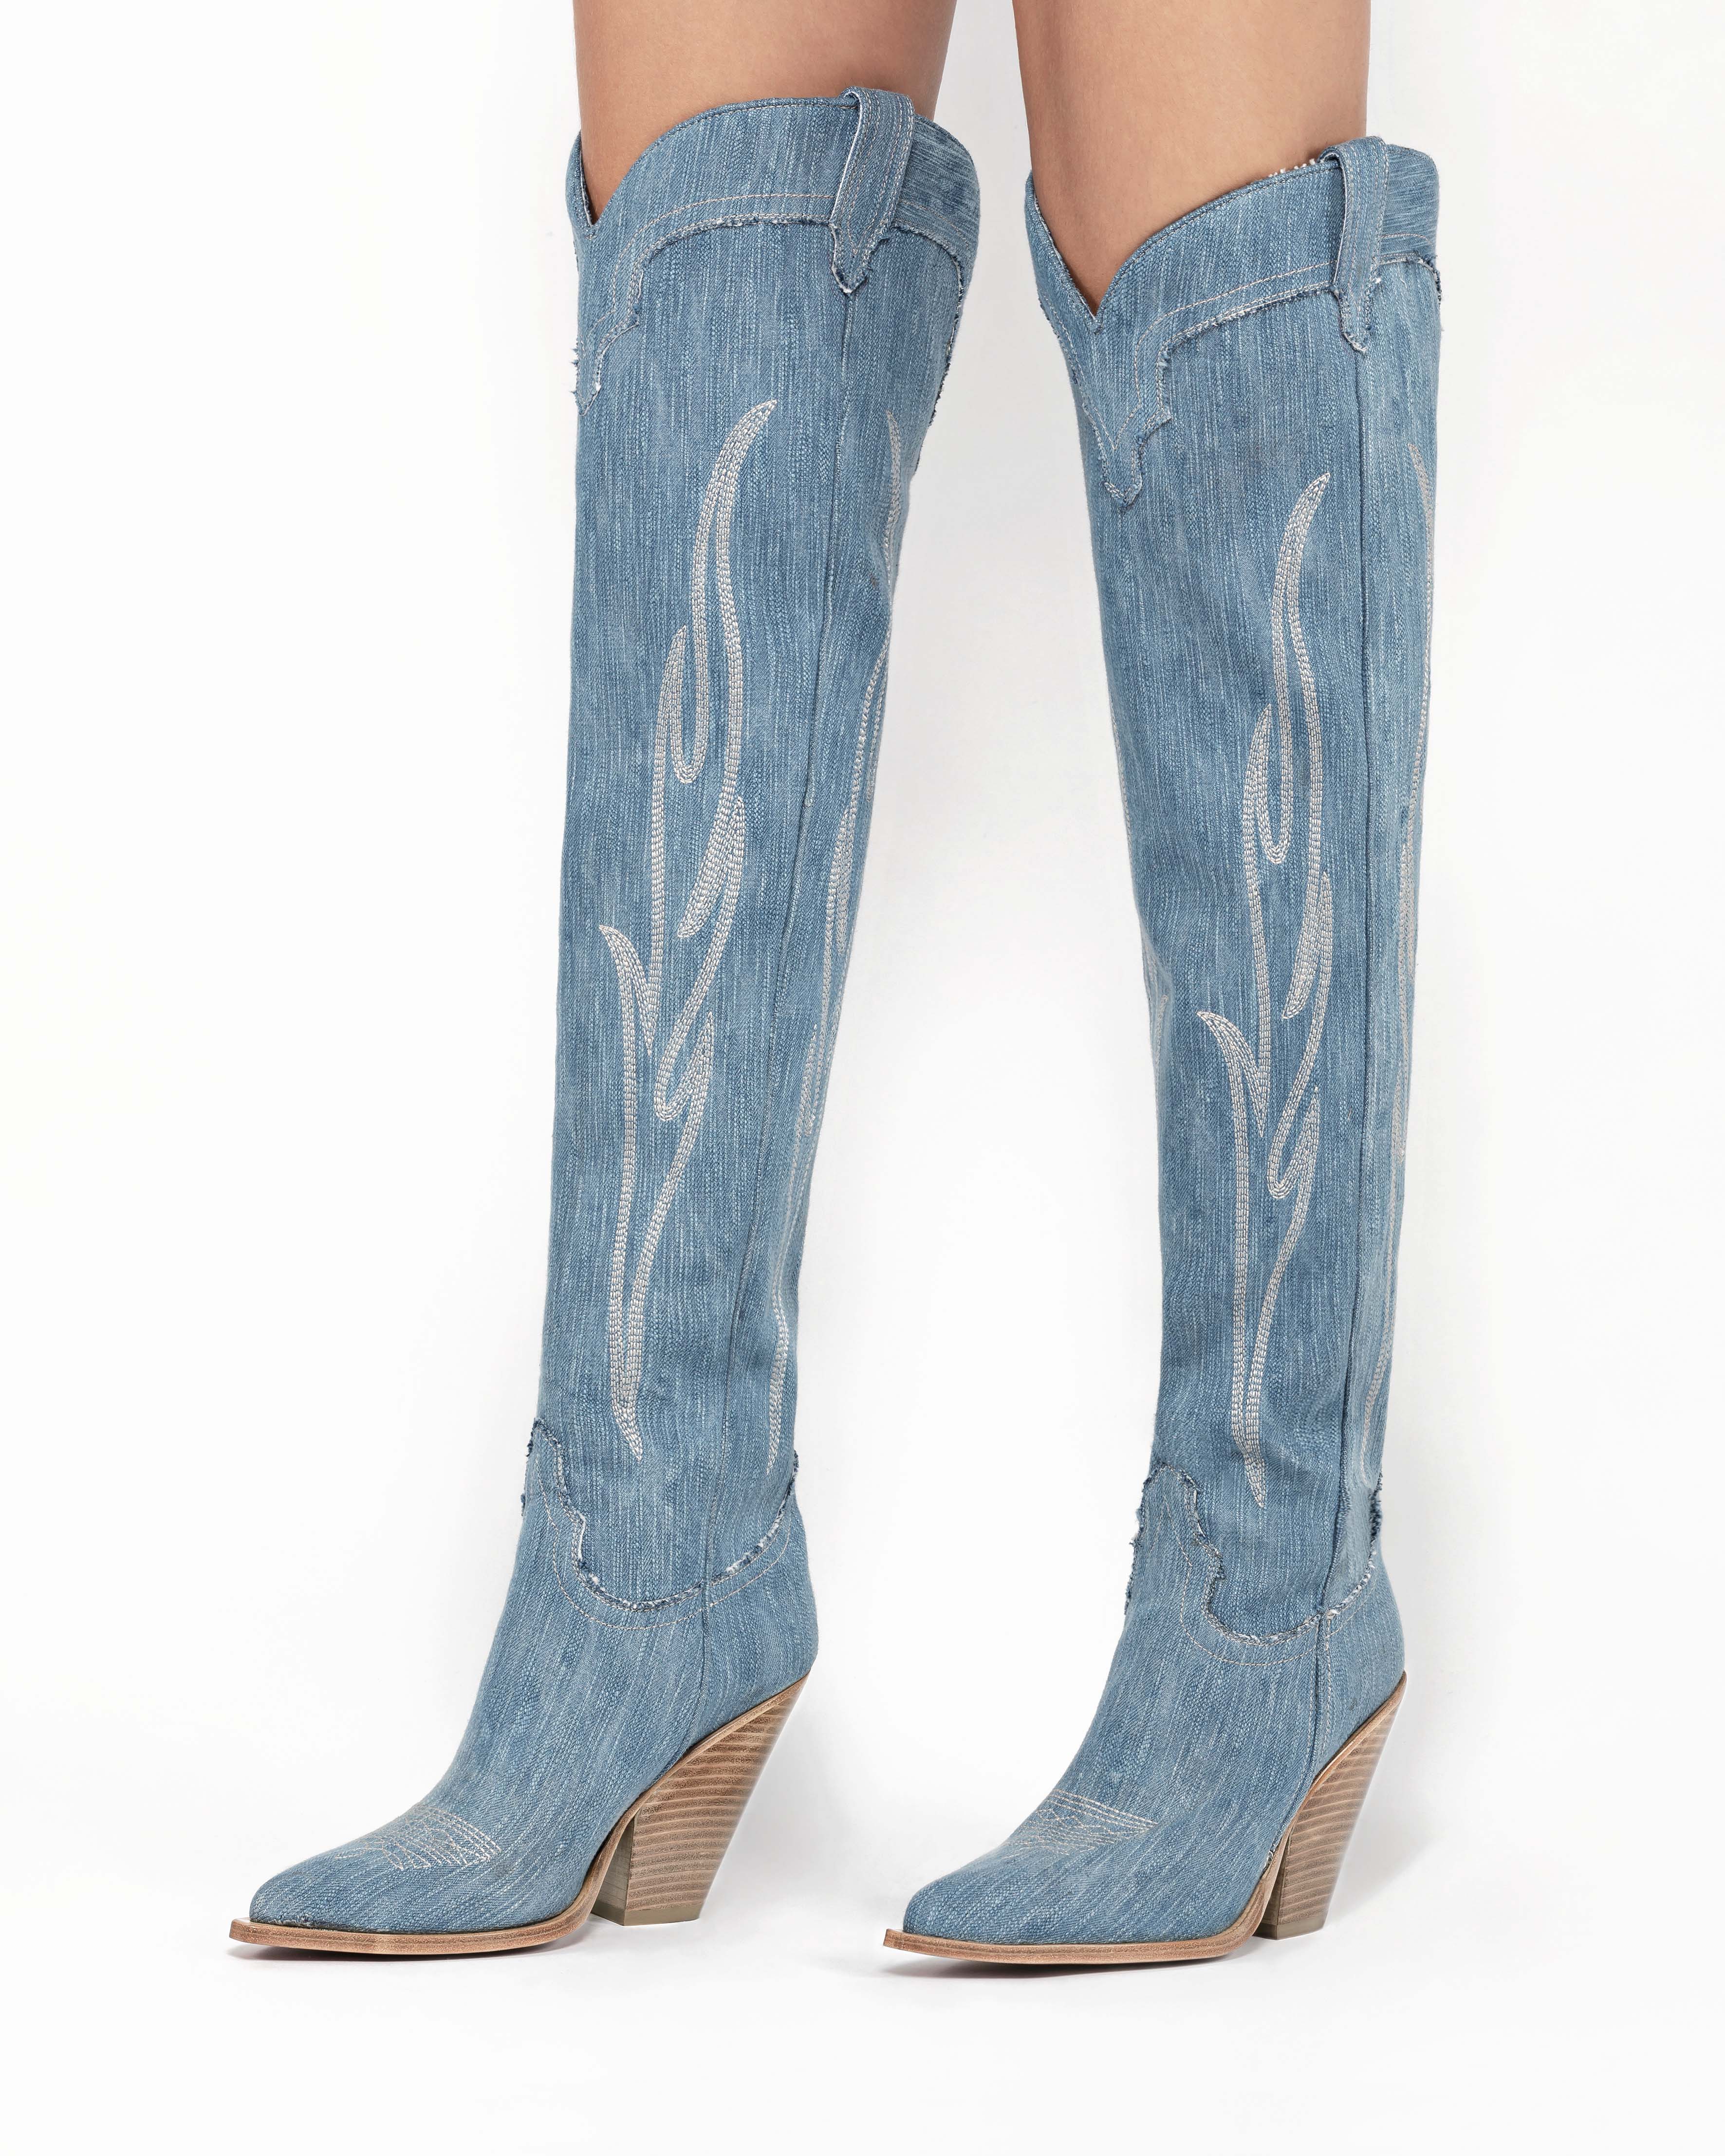 HERMOSA Women's Over The Knee Boots in Light Blue Jeans | Off-White Embroidery_Indossato_01